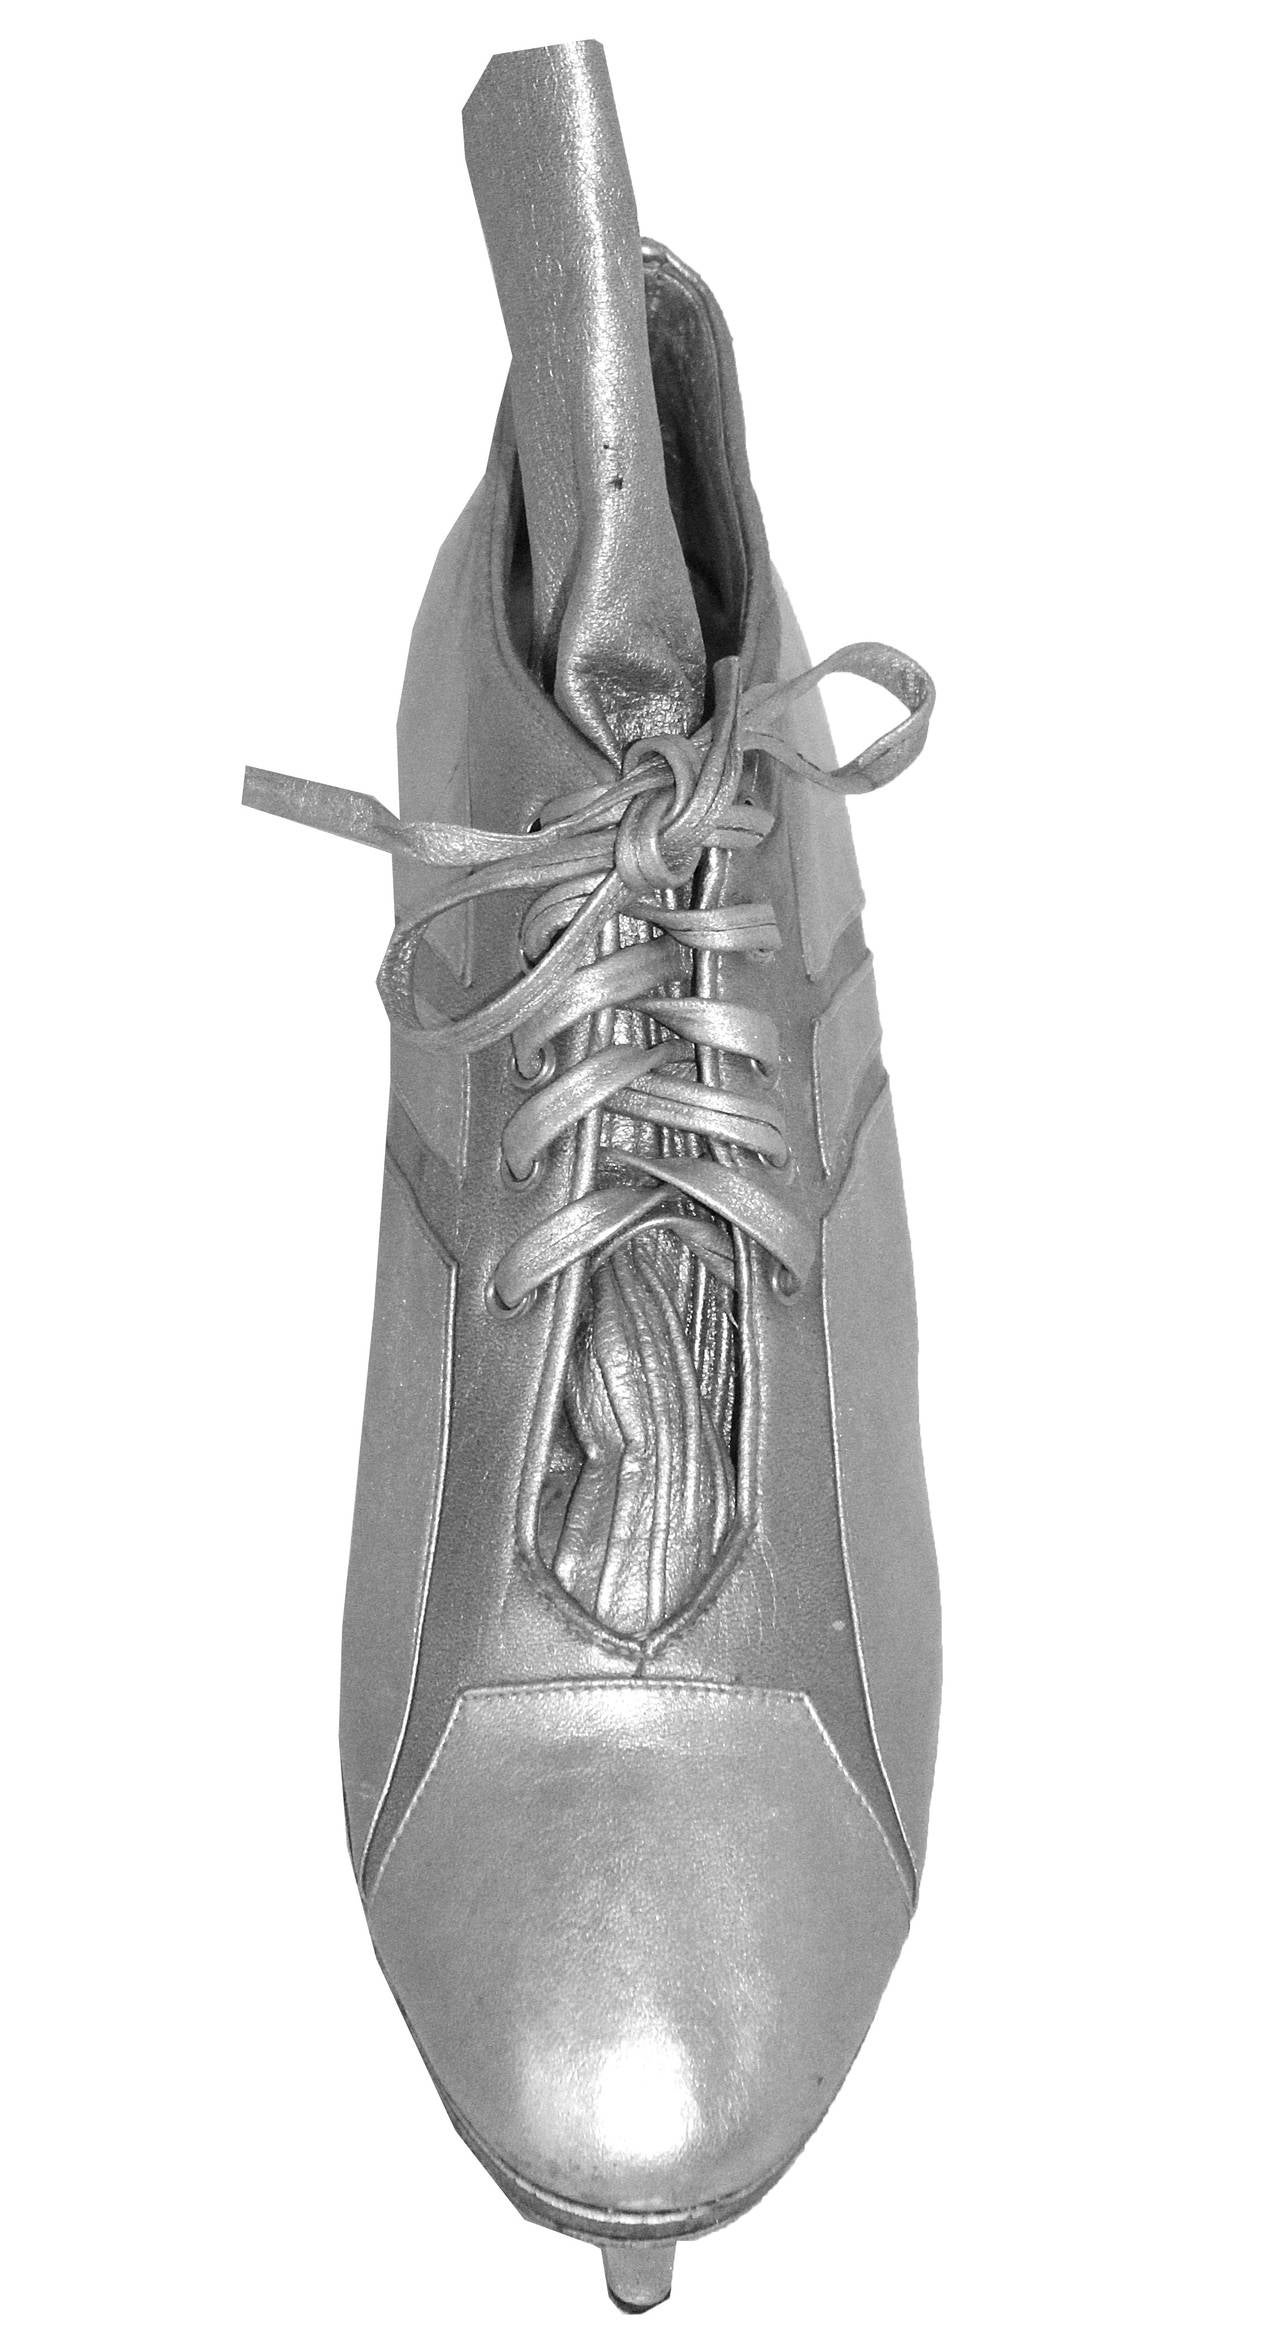 A pair of metallic silver boots designed for Jean Paul Gaultier by Massaro Paris. The inspiration behind the design were football boots and the idea of extending the height. 

The boots were designed for the Spring/Summer 1993 runway show and are